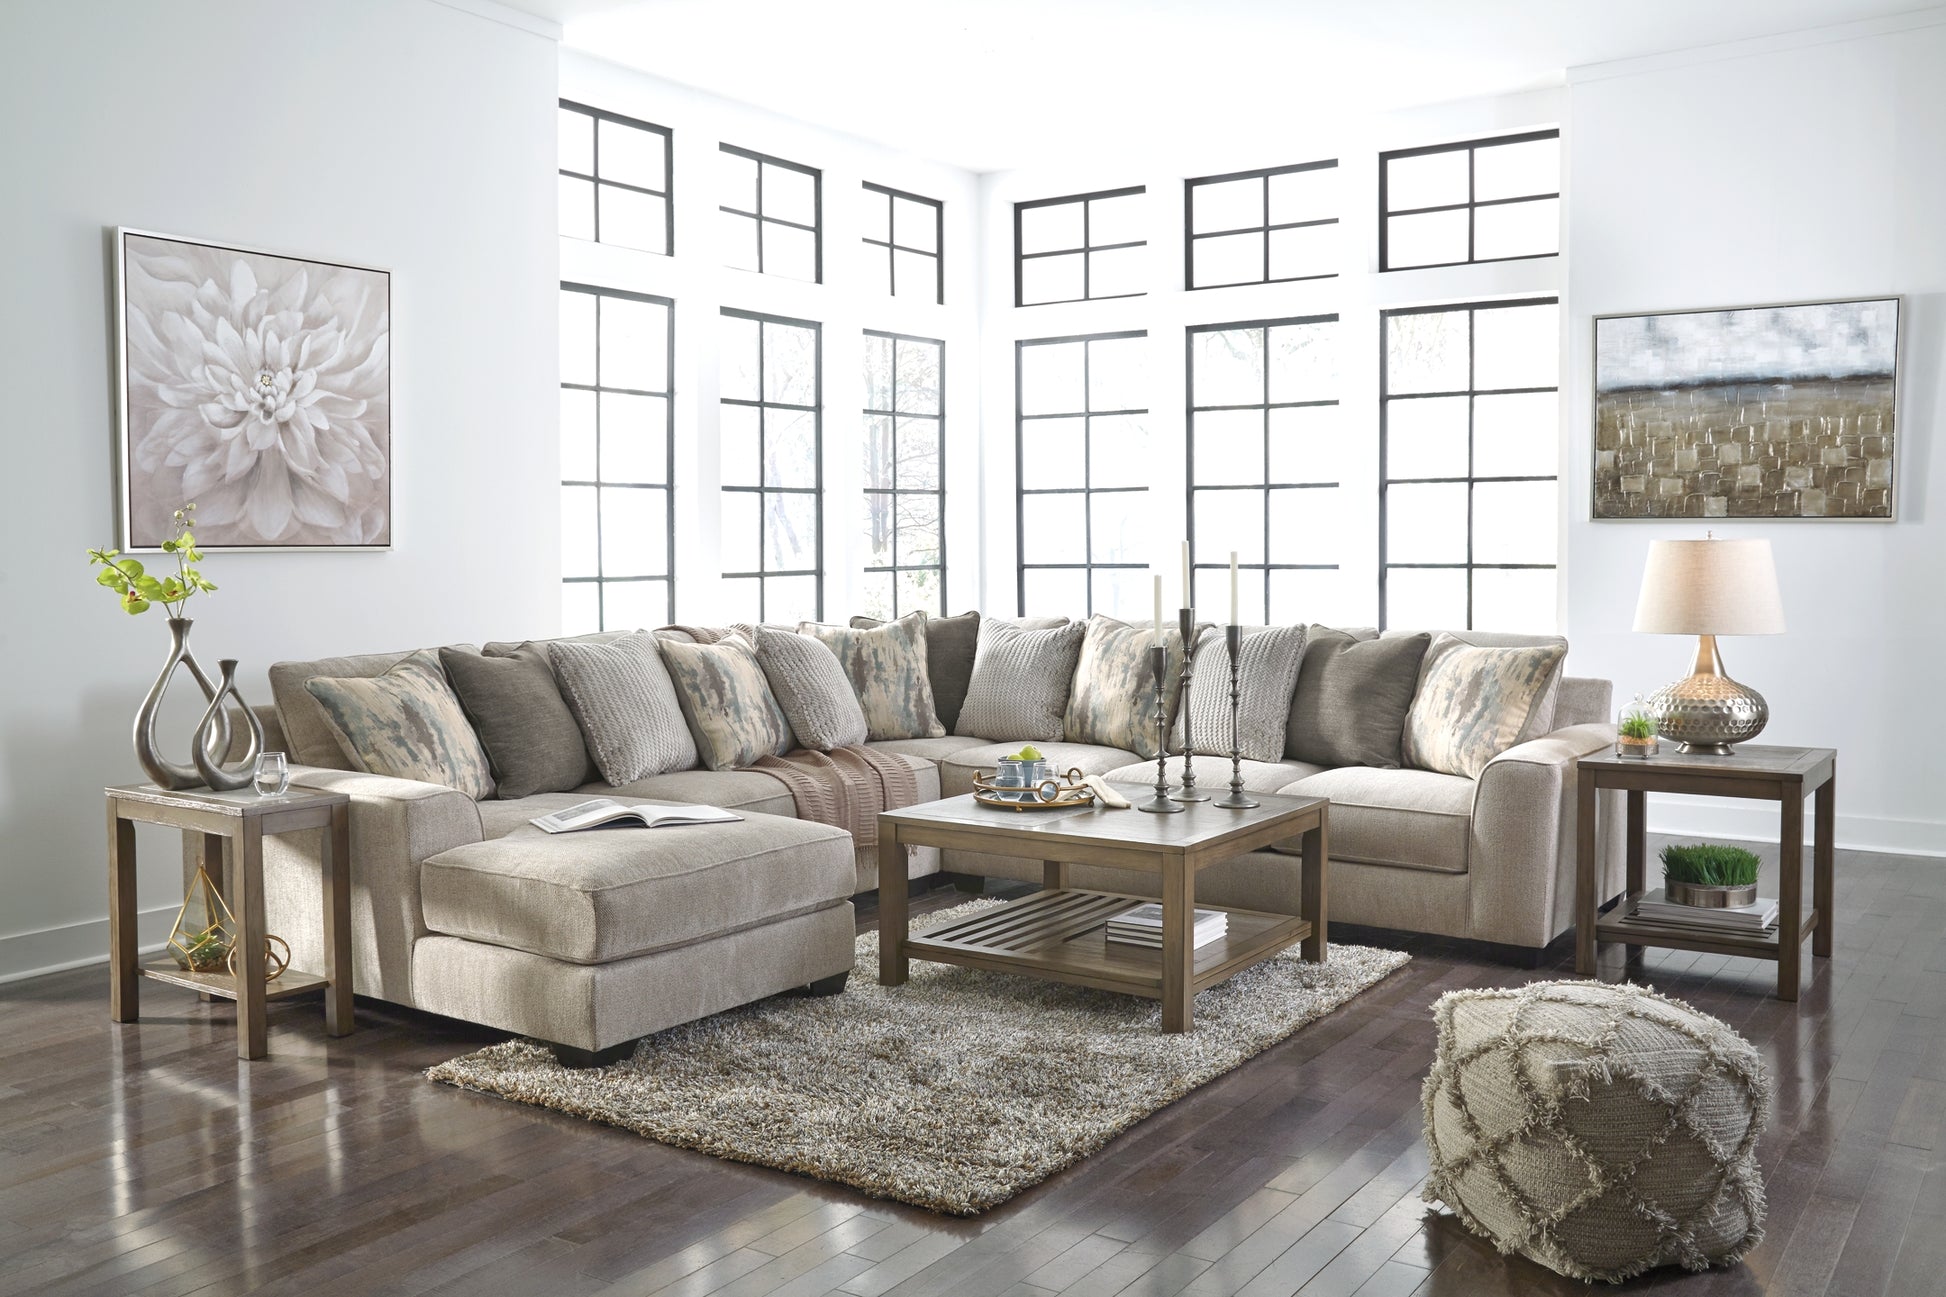 Ardsley 4-Piece Sectional with Chaise Wilson Furniture (OH)  in Bridgeport, Ohio. Serving Bridgeport, Yorkville, Bellaire, & Avondale